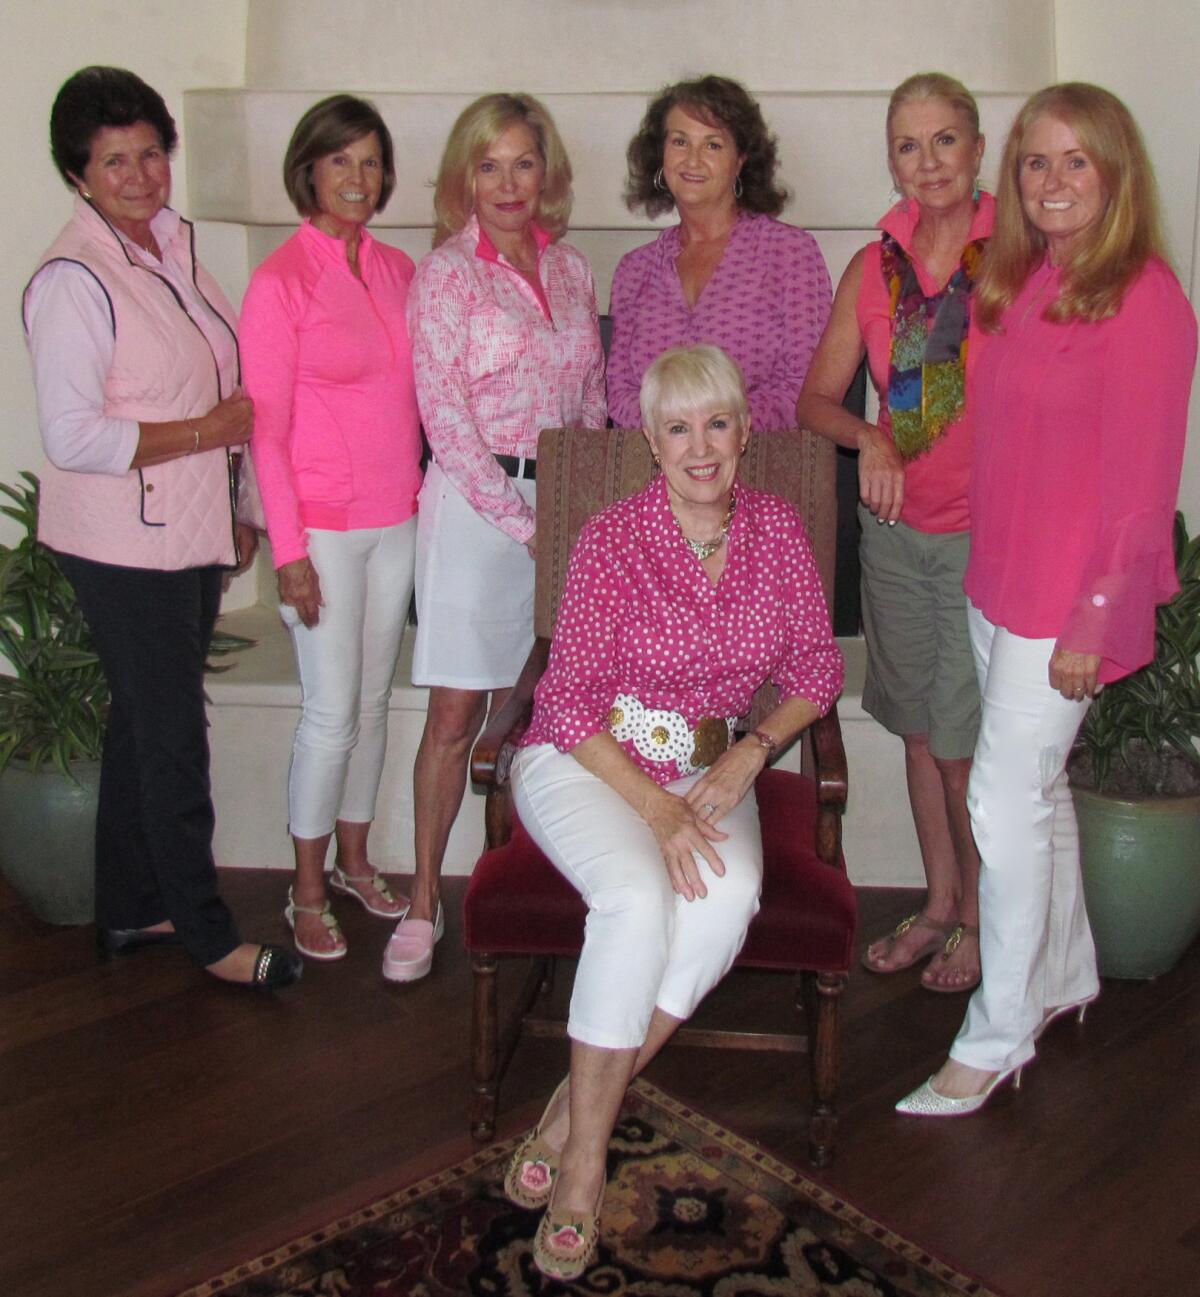 Seated: Play for P.I.N.K. Honorary Chairwoman Sharon Considine; Standing: Women’s Golf Board and Committee Members: (l-r) Pat Newmark, Diane Culp, Michele Homan, Becky Vigil, Janet Christ and Kris Charton.